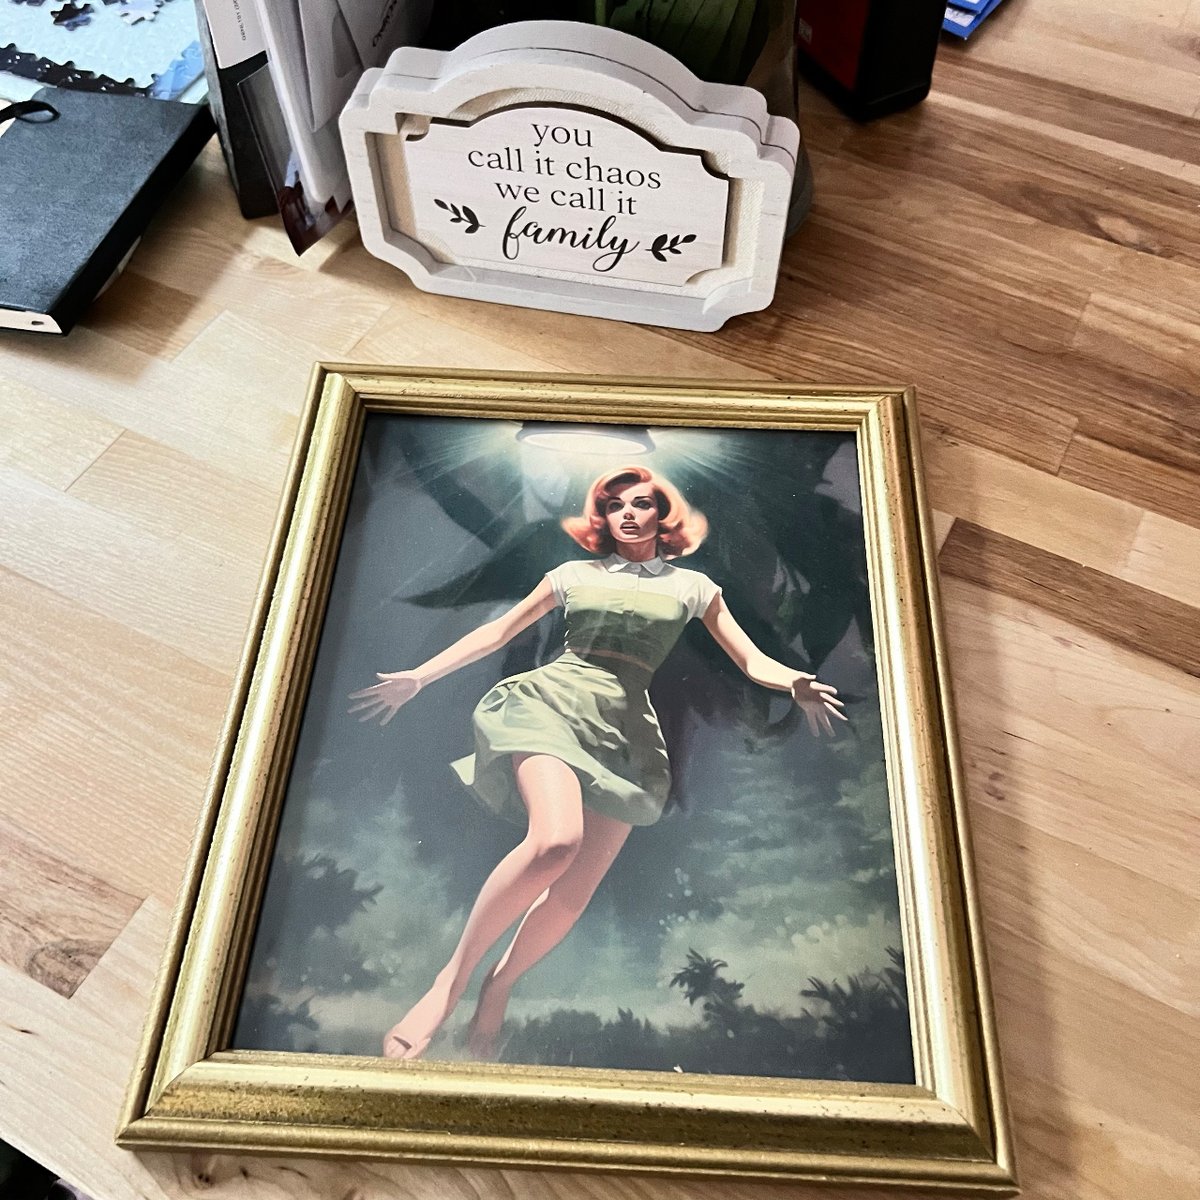 Who’s going to stop by the Kinderhook Library May 25th? There will be a paranormal event with vendors and presenters. repurposed vintage frame 
.
#rogue518 #roguesalvage #roguesalvagegifts #aliens #alienabduction #aliensarereal #paranormal